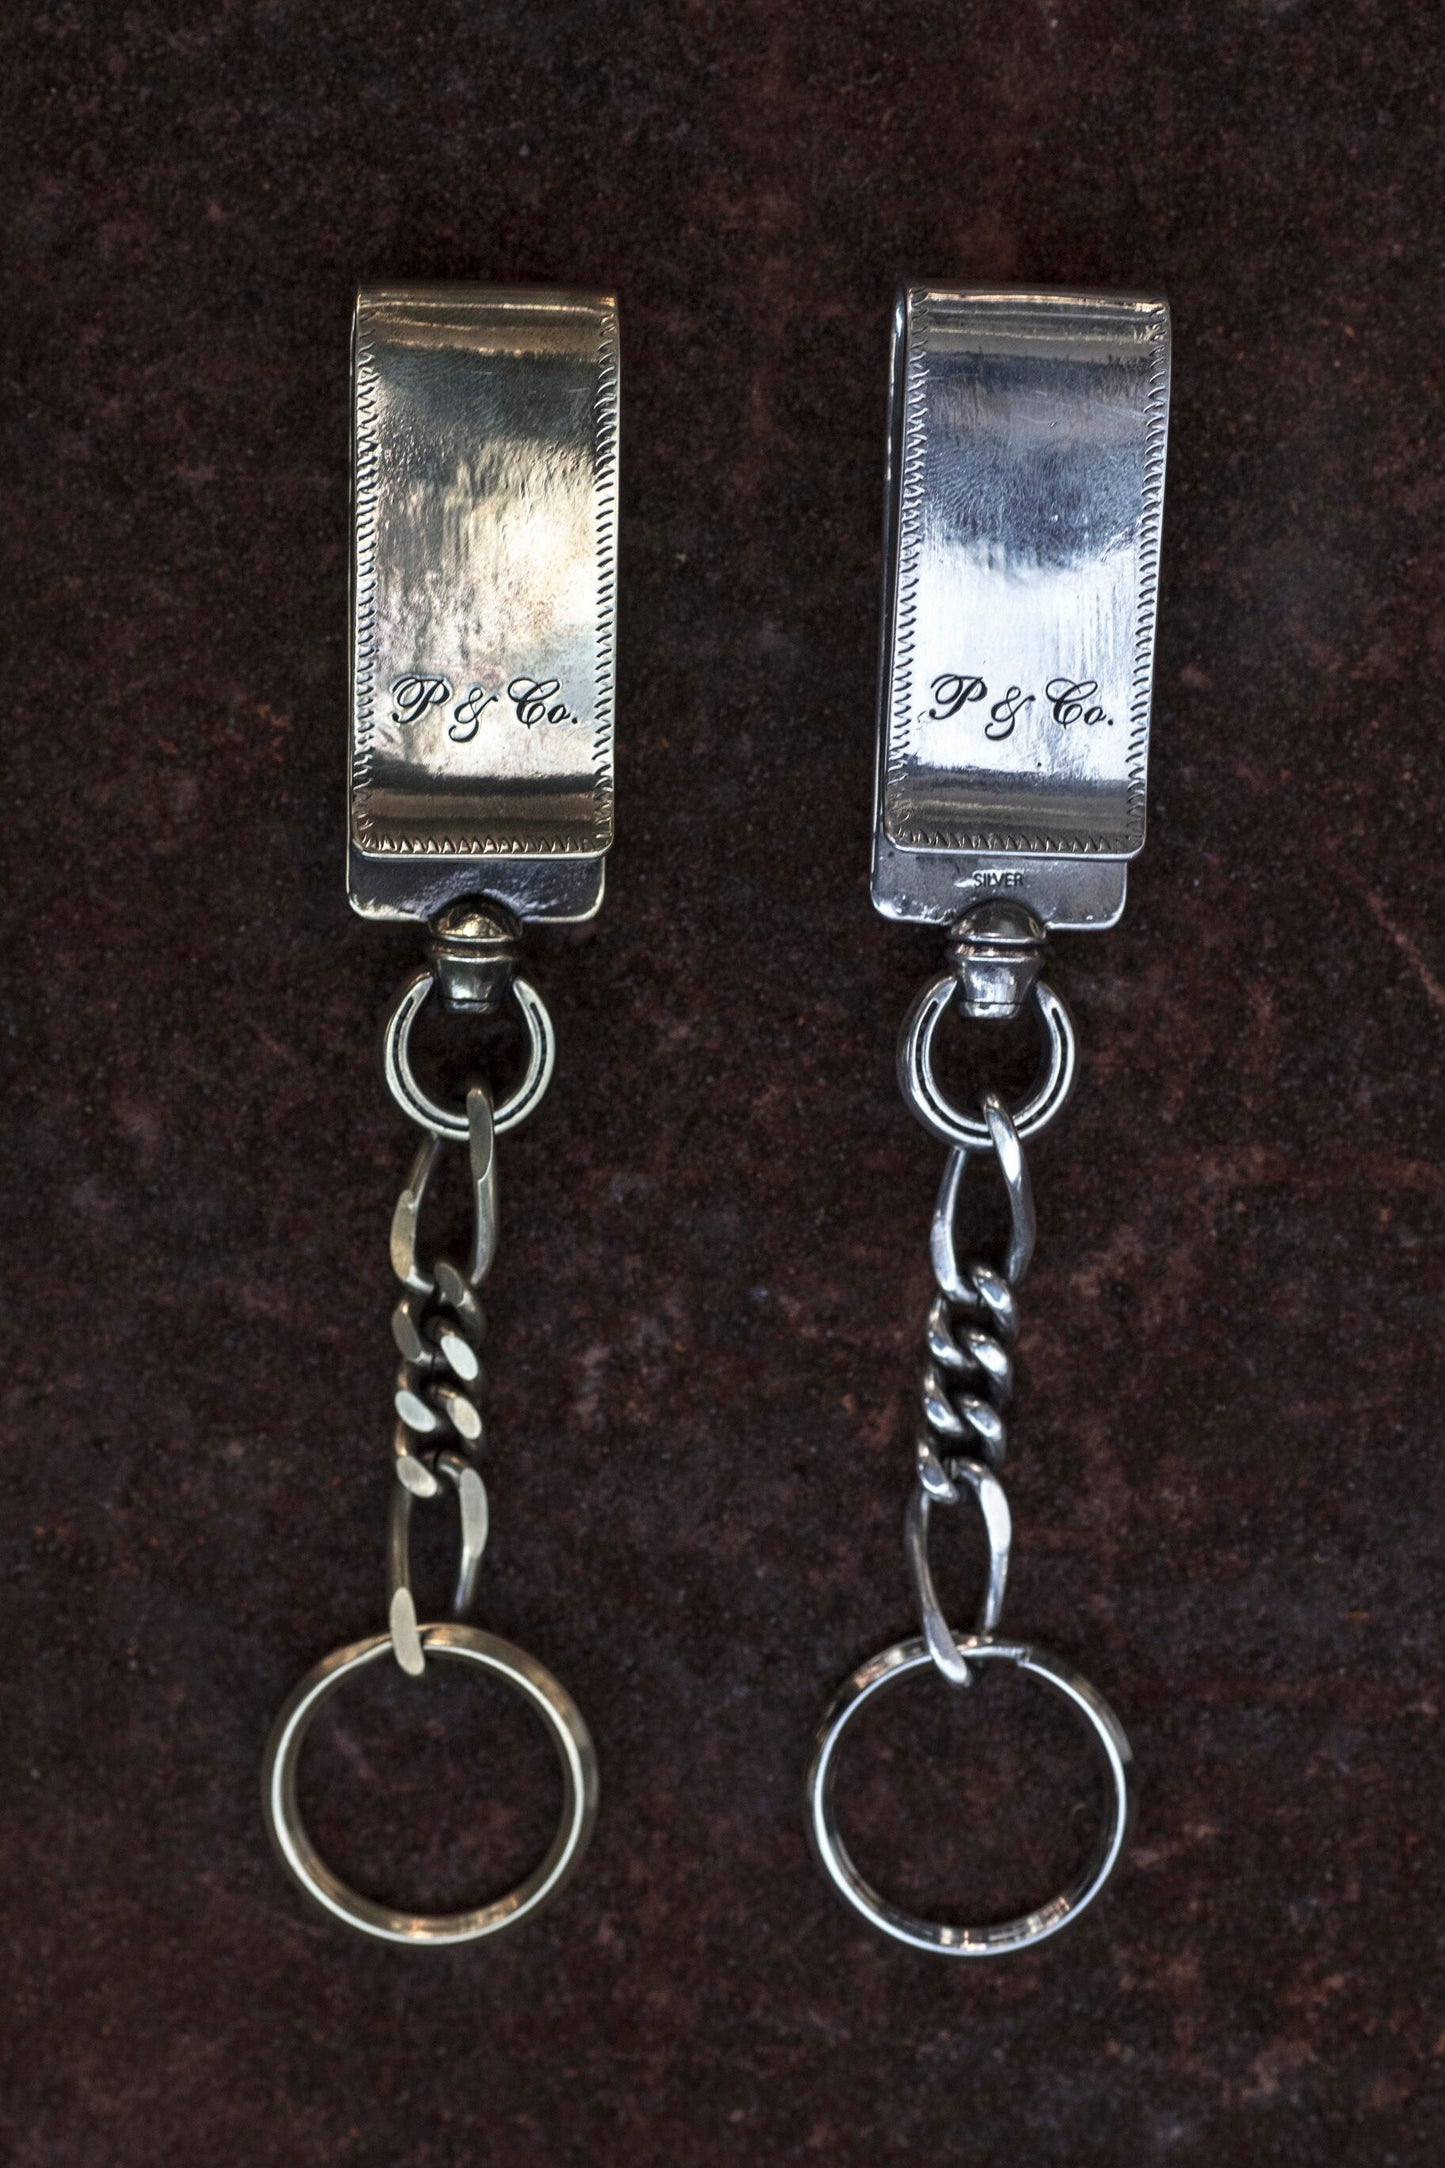 Peanuts&Co horse clip type keychain silver